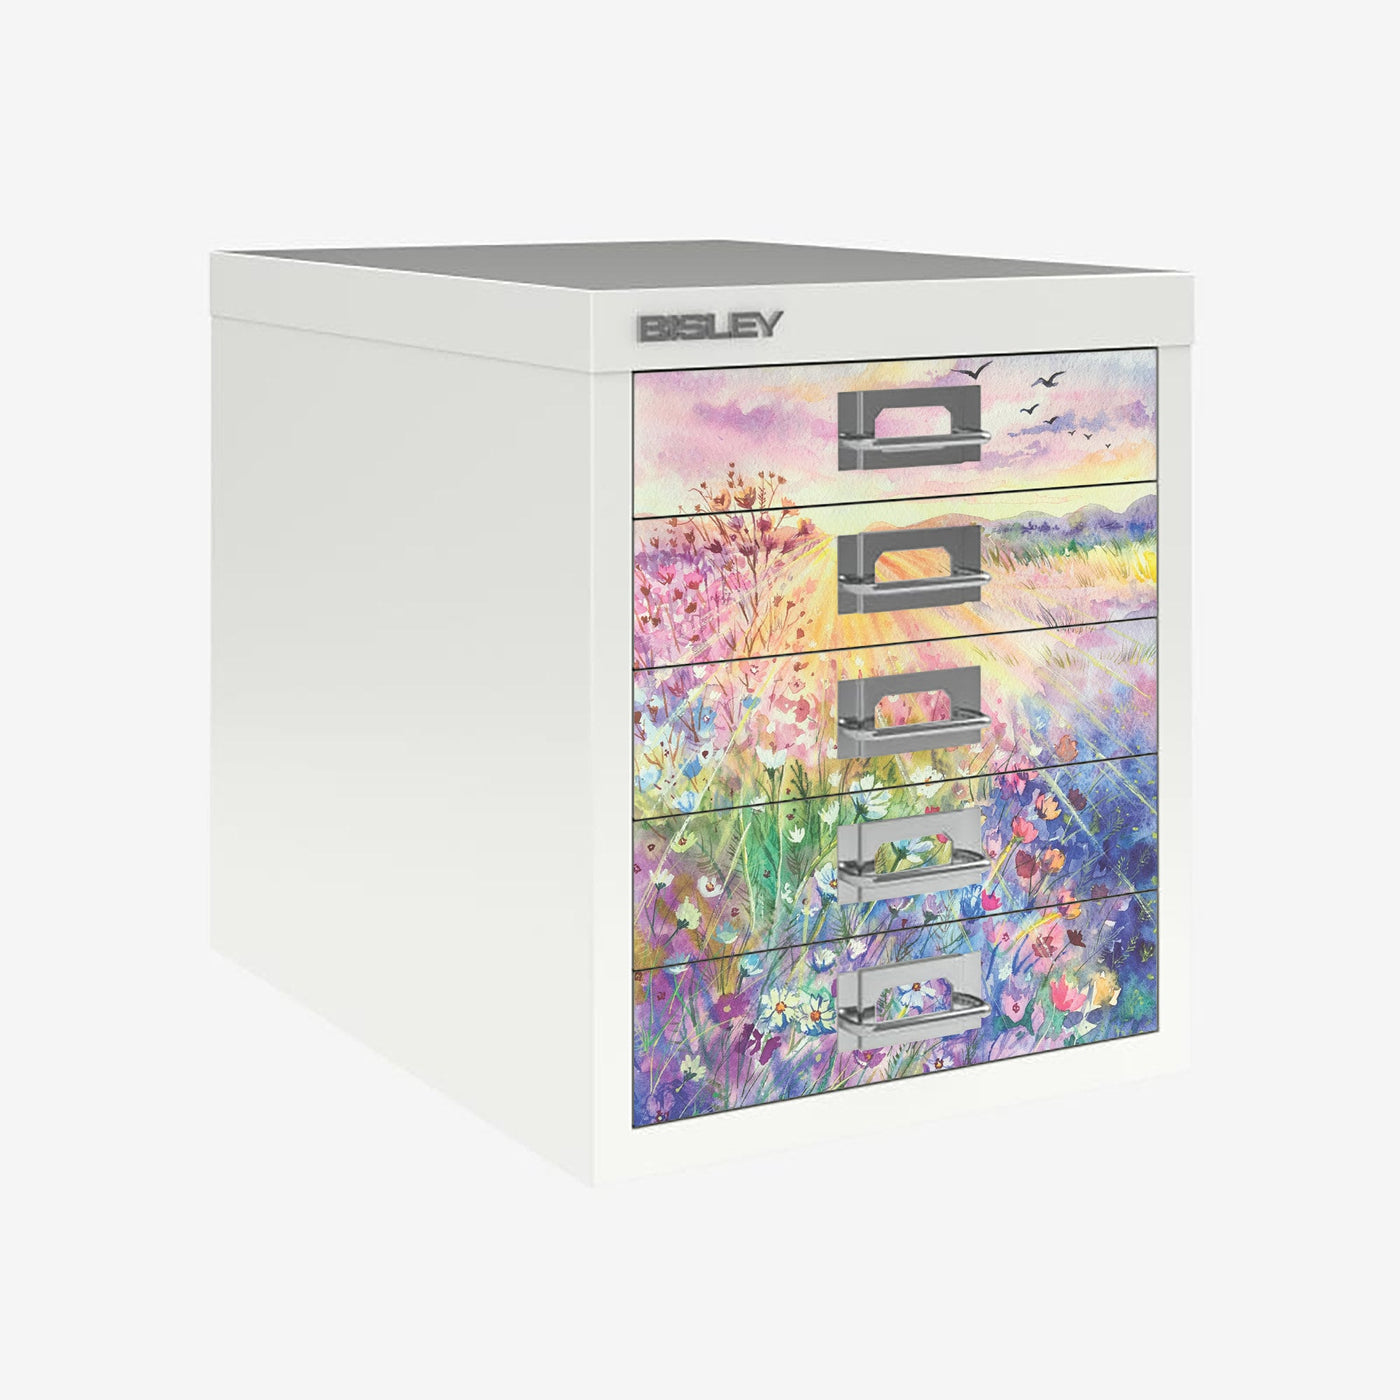 Watercolour Sunrise Meadow decals for Bisley 5 drawer cabinet (not included)